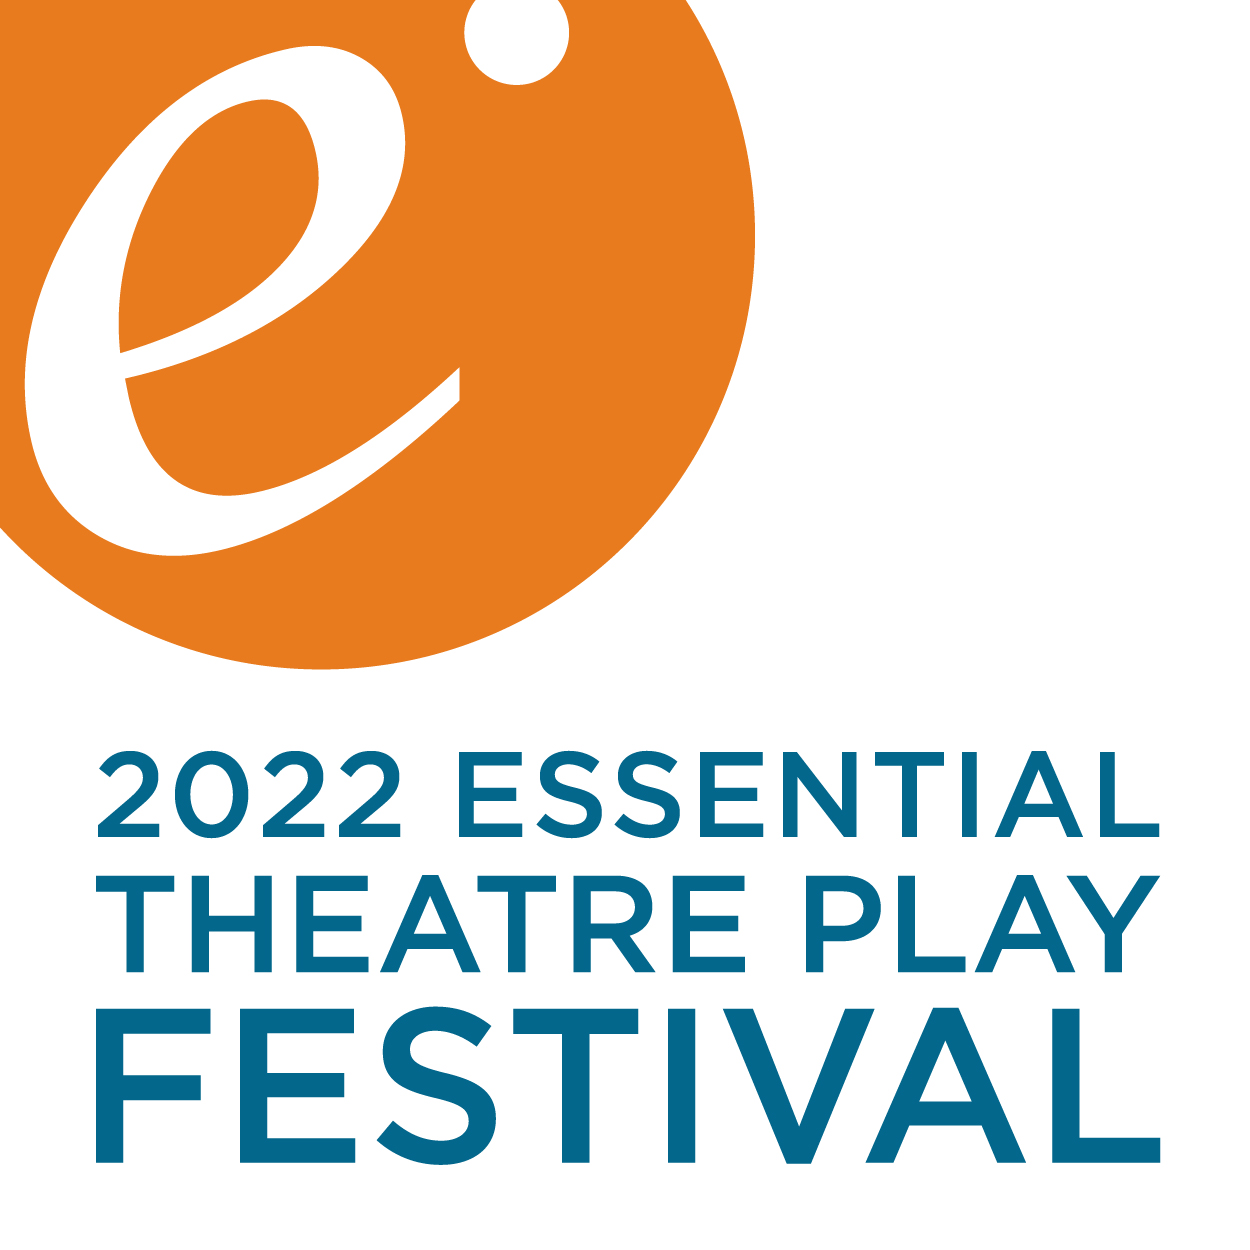 The 2022 Essential Theatre Play Festival